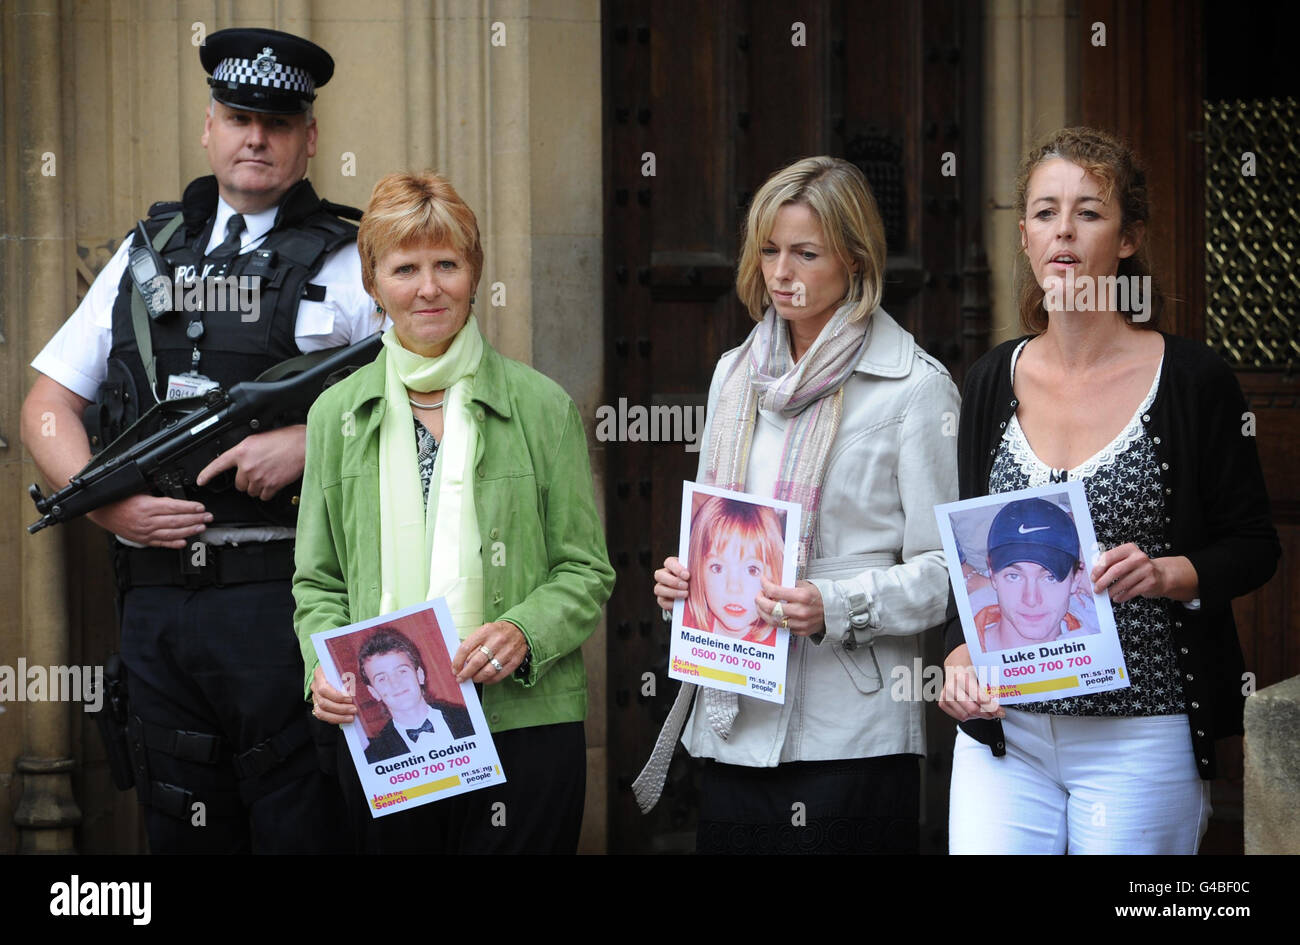 Kate McCann (centre), mother of Madeleine McCann who went missing in 2007 in Portugal arrives at a parliamentary inquiry into missing persons along with Nicki Durban (right) mother of missing Luke Durbin and Sarah Godwin (left) mother of missing Quentin Godwin, at the House of Commons in London. Stock Photo